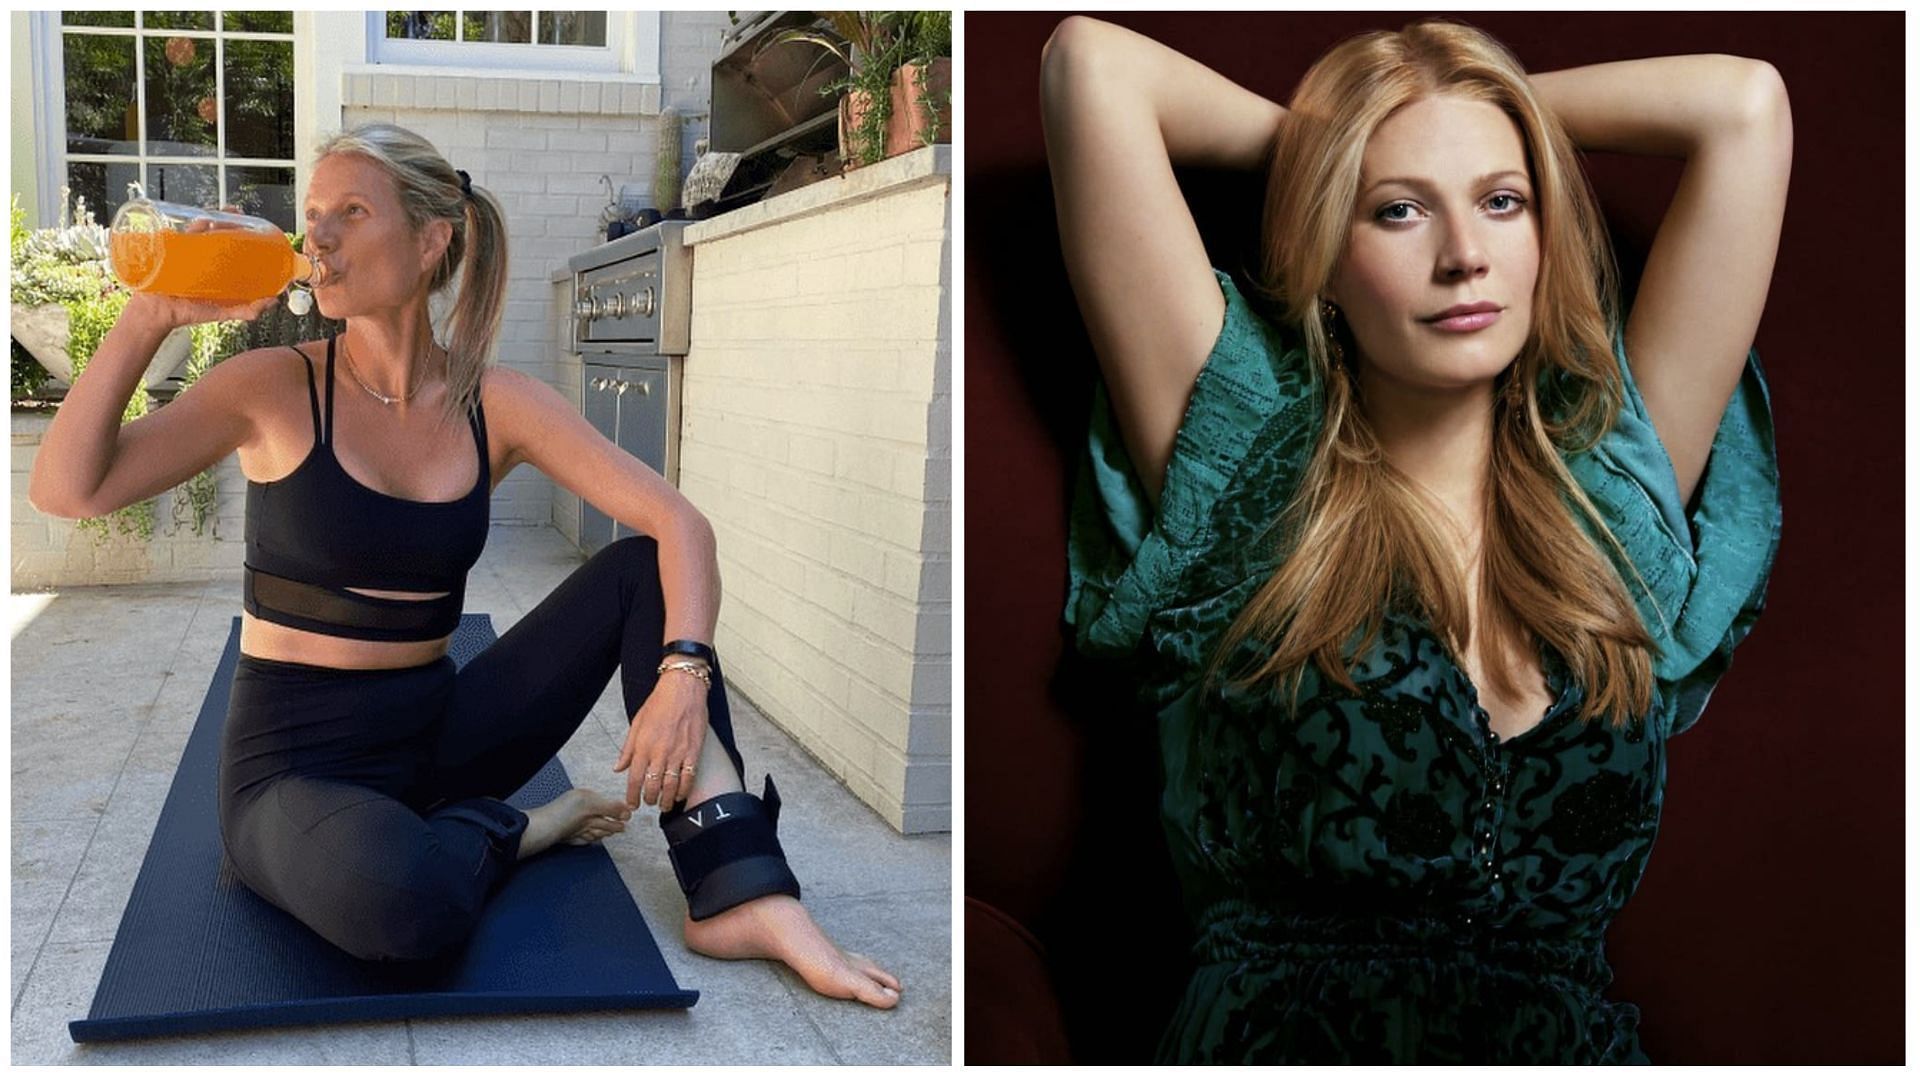 Gwyneth Paltrow is in fabulous shape and promotes a variety of healthy lifestyle options. (Image via Instagram)